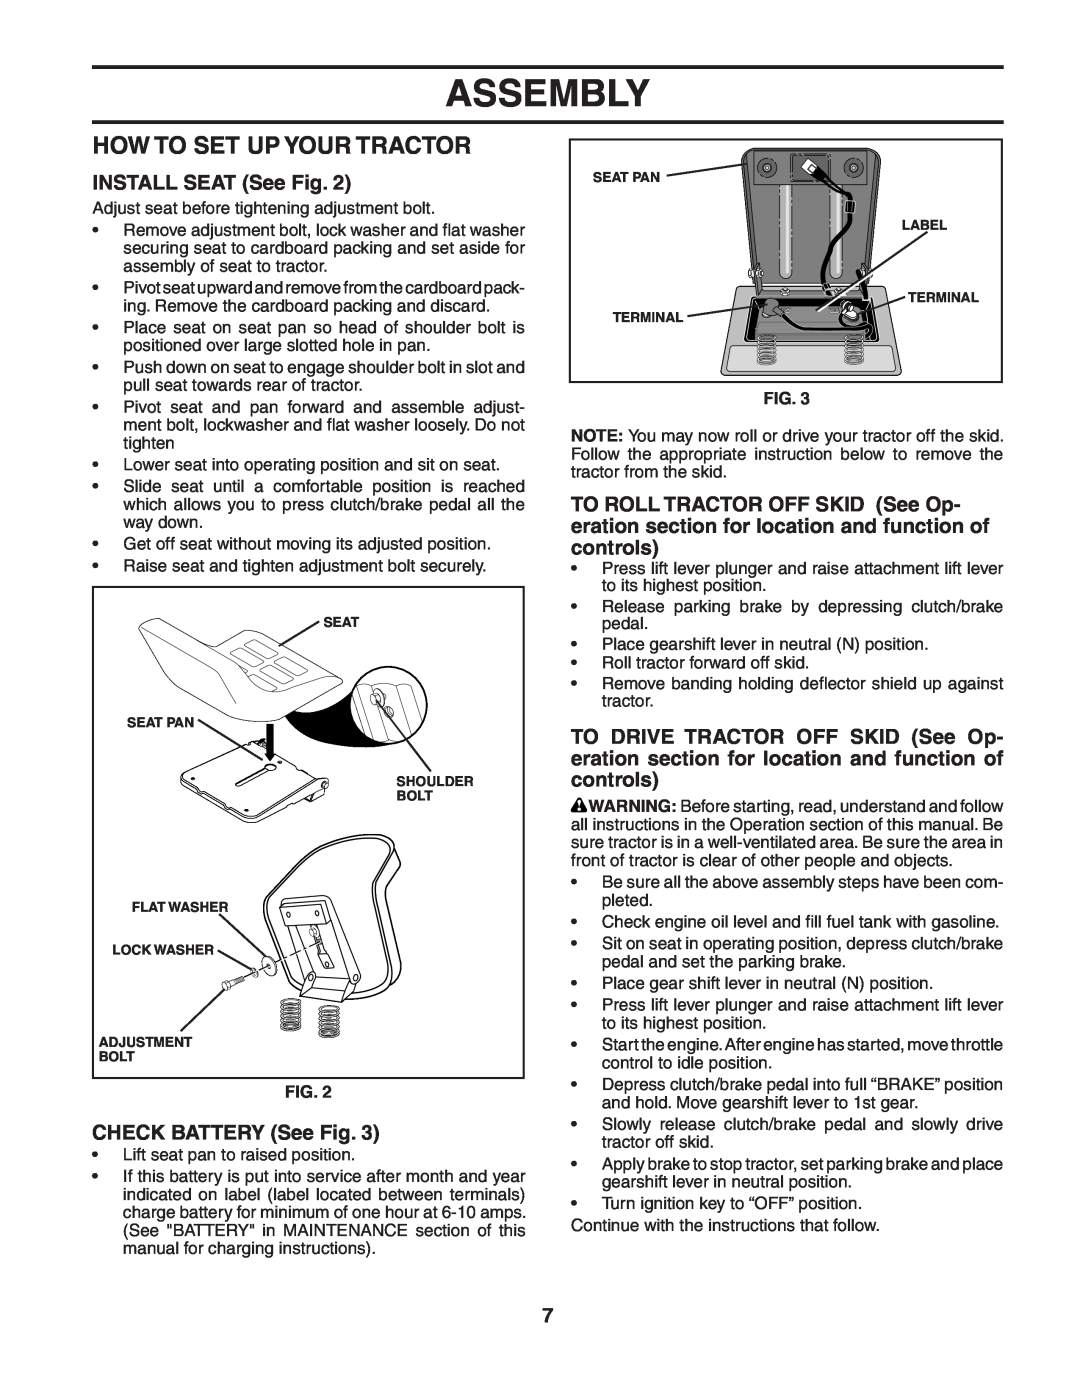 Poulan PO1742STB manual How To Set Up Your Tractor, INSTALL SEAT See Fig, CHECK BATTERY See Fig, Assembly 